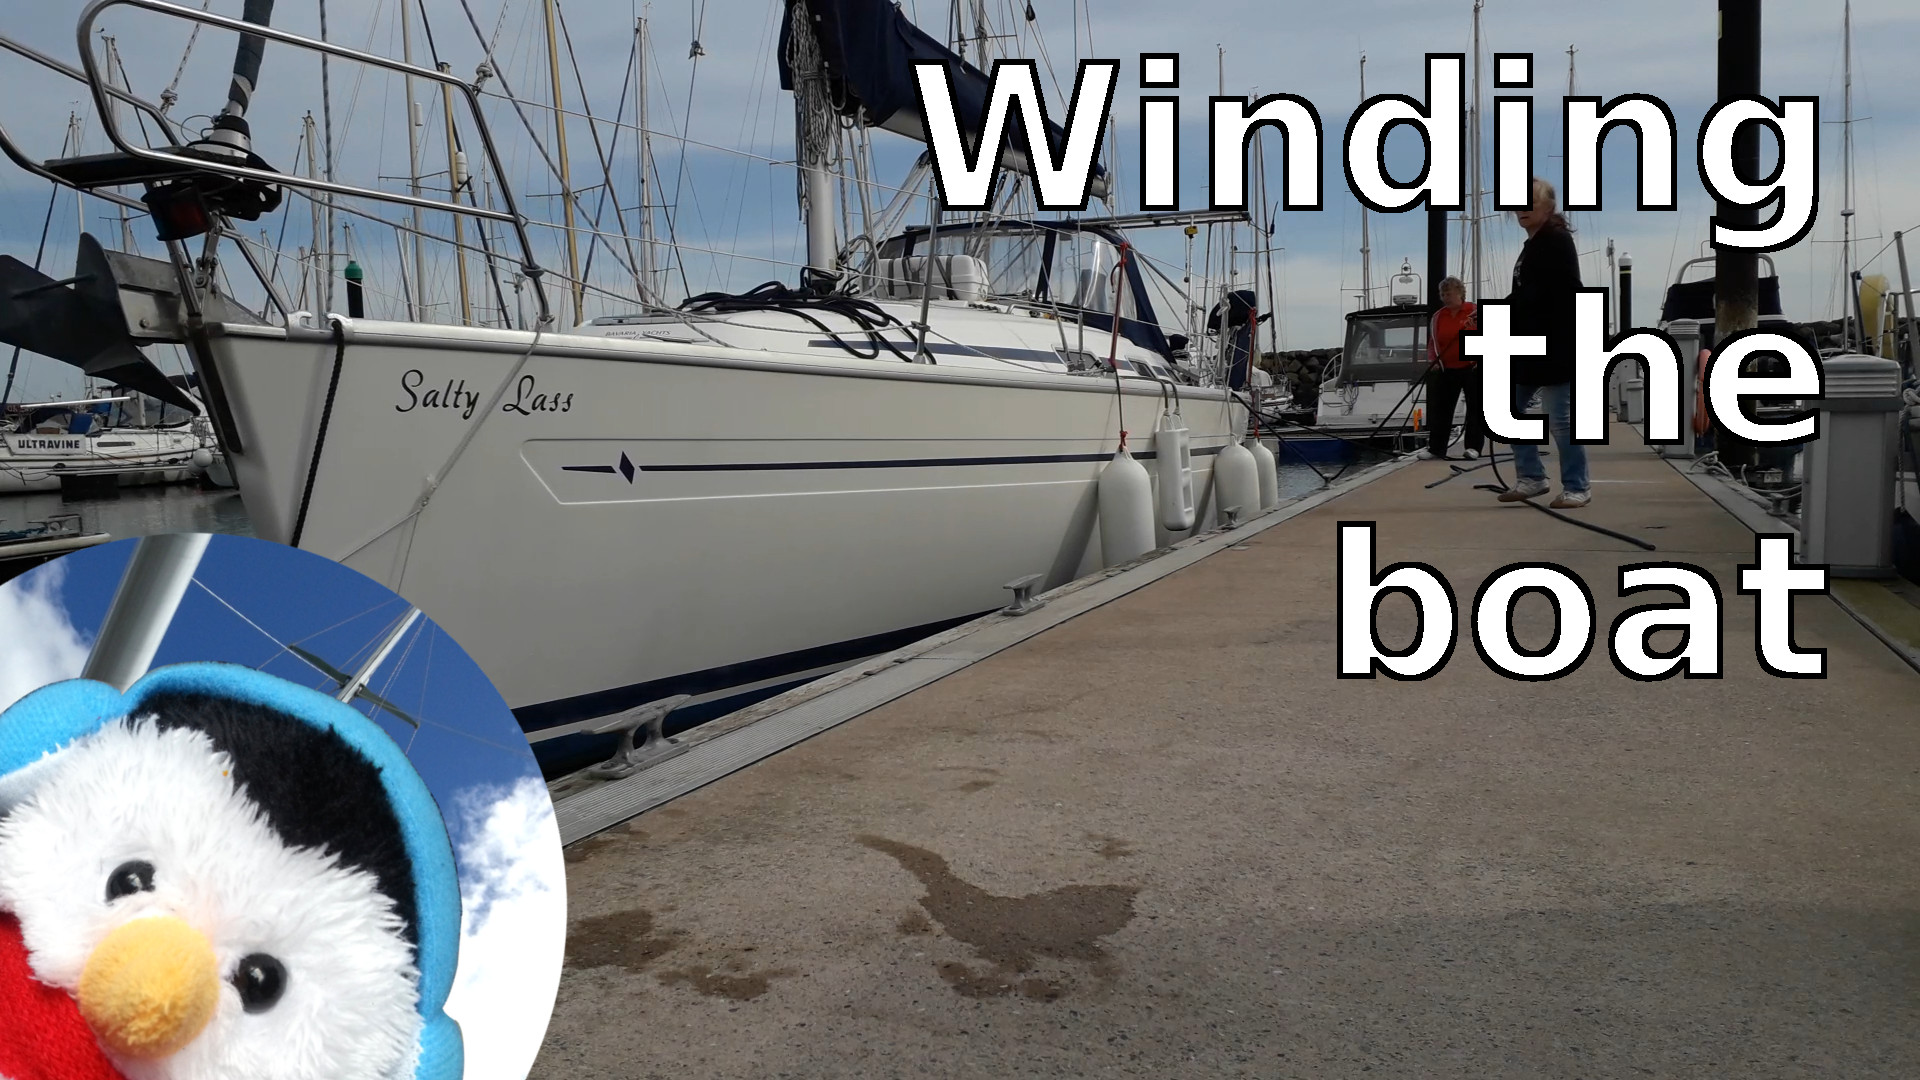 Watch our "Winding the boat" video and add comments etc.